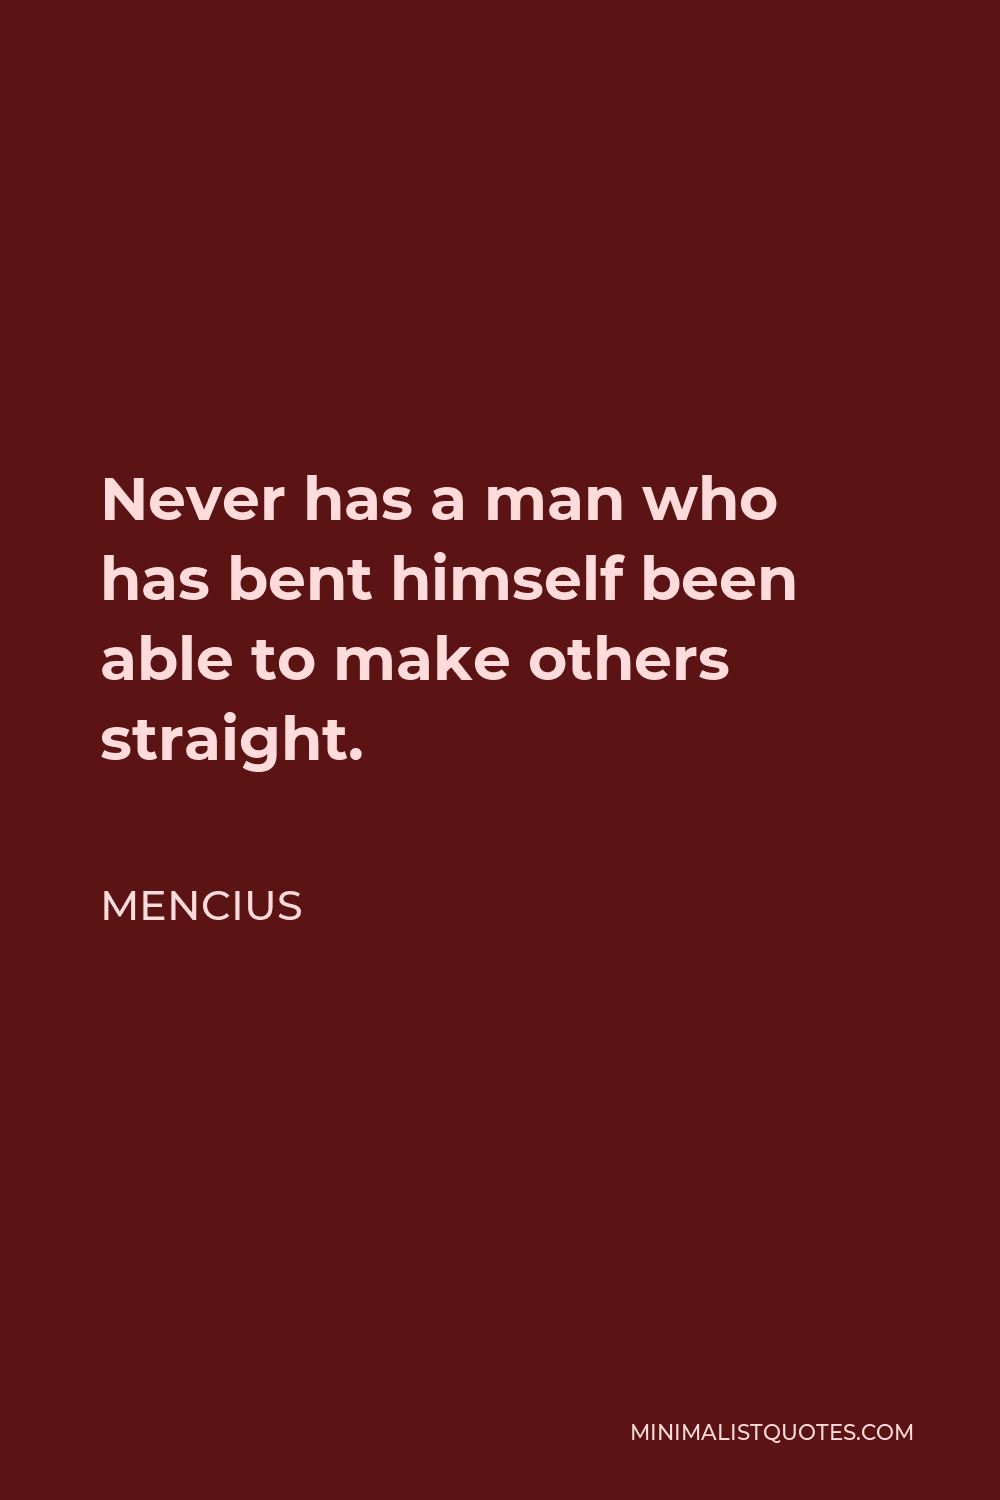 Mencius Quote - Never has a man who has bent himself been able to make others straight.